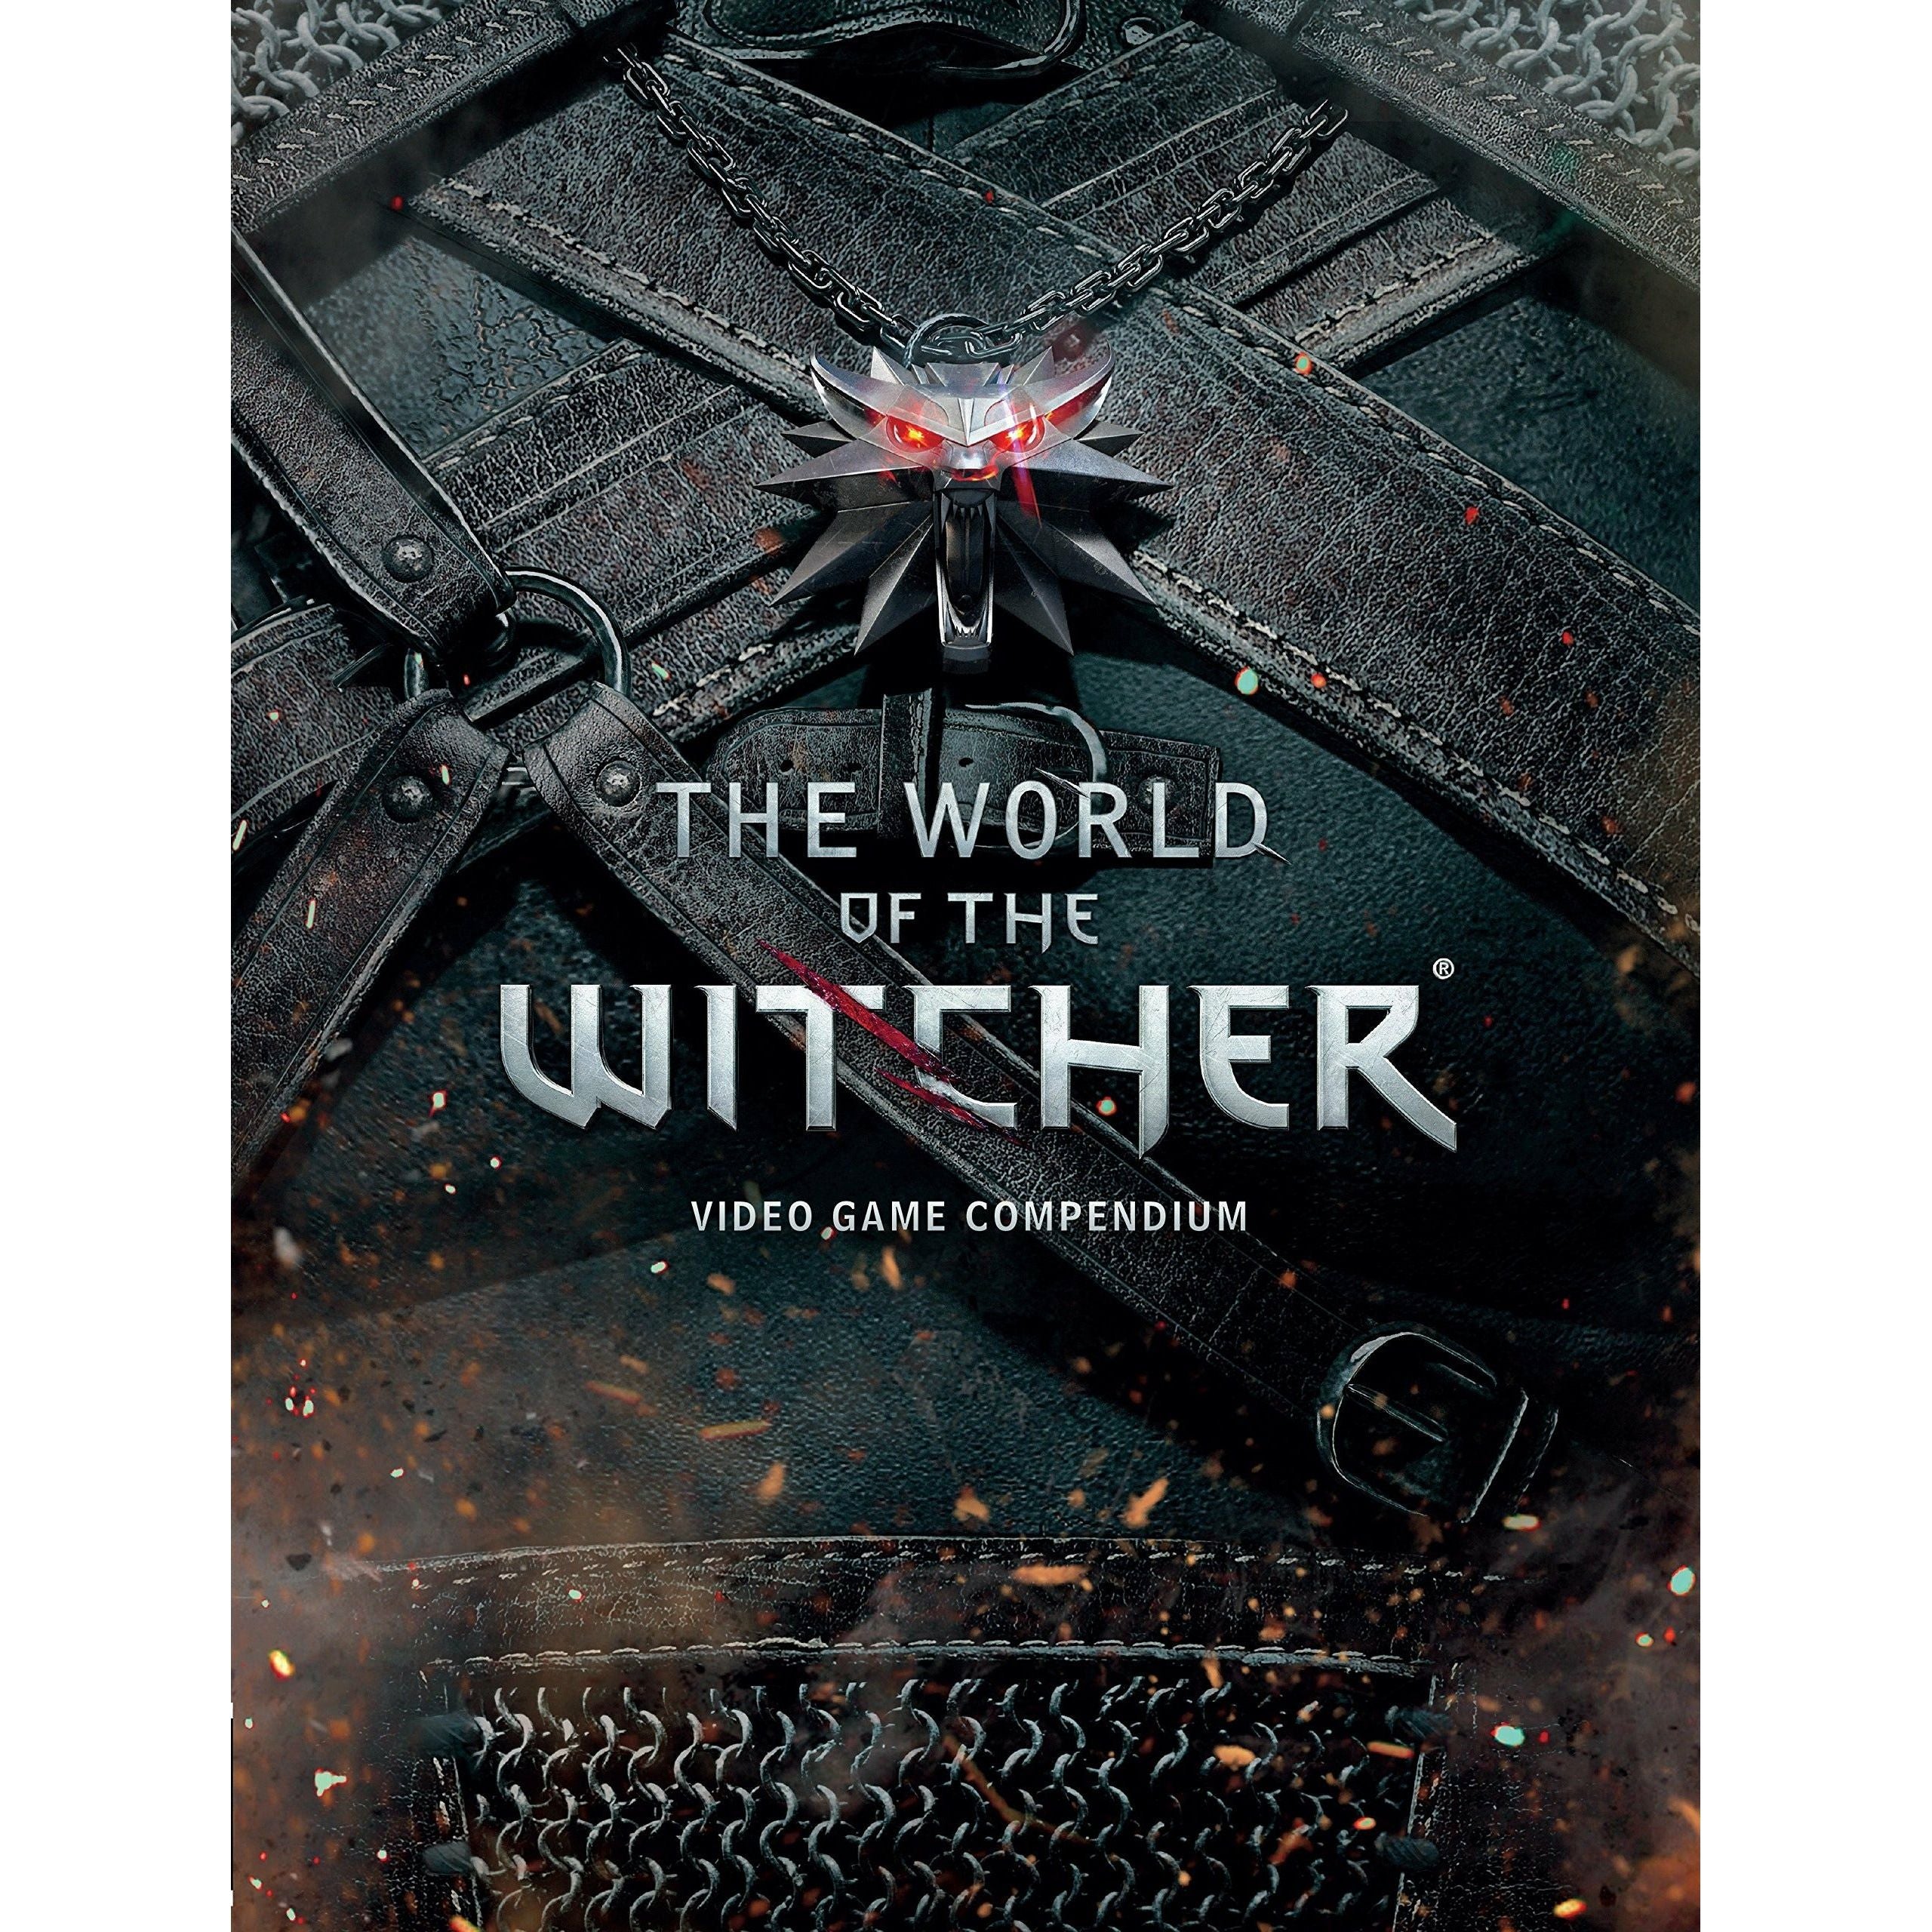 BOOK - The World Of The Witcher - Video Game Compendium